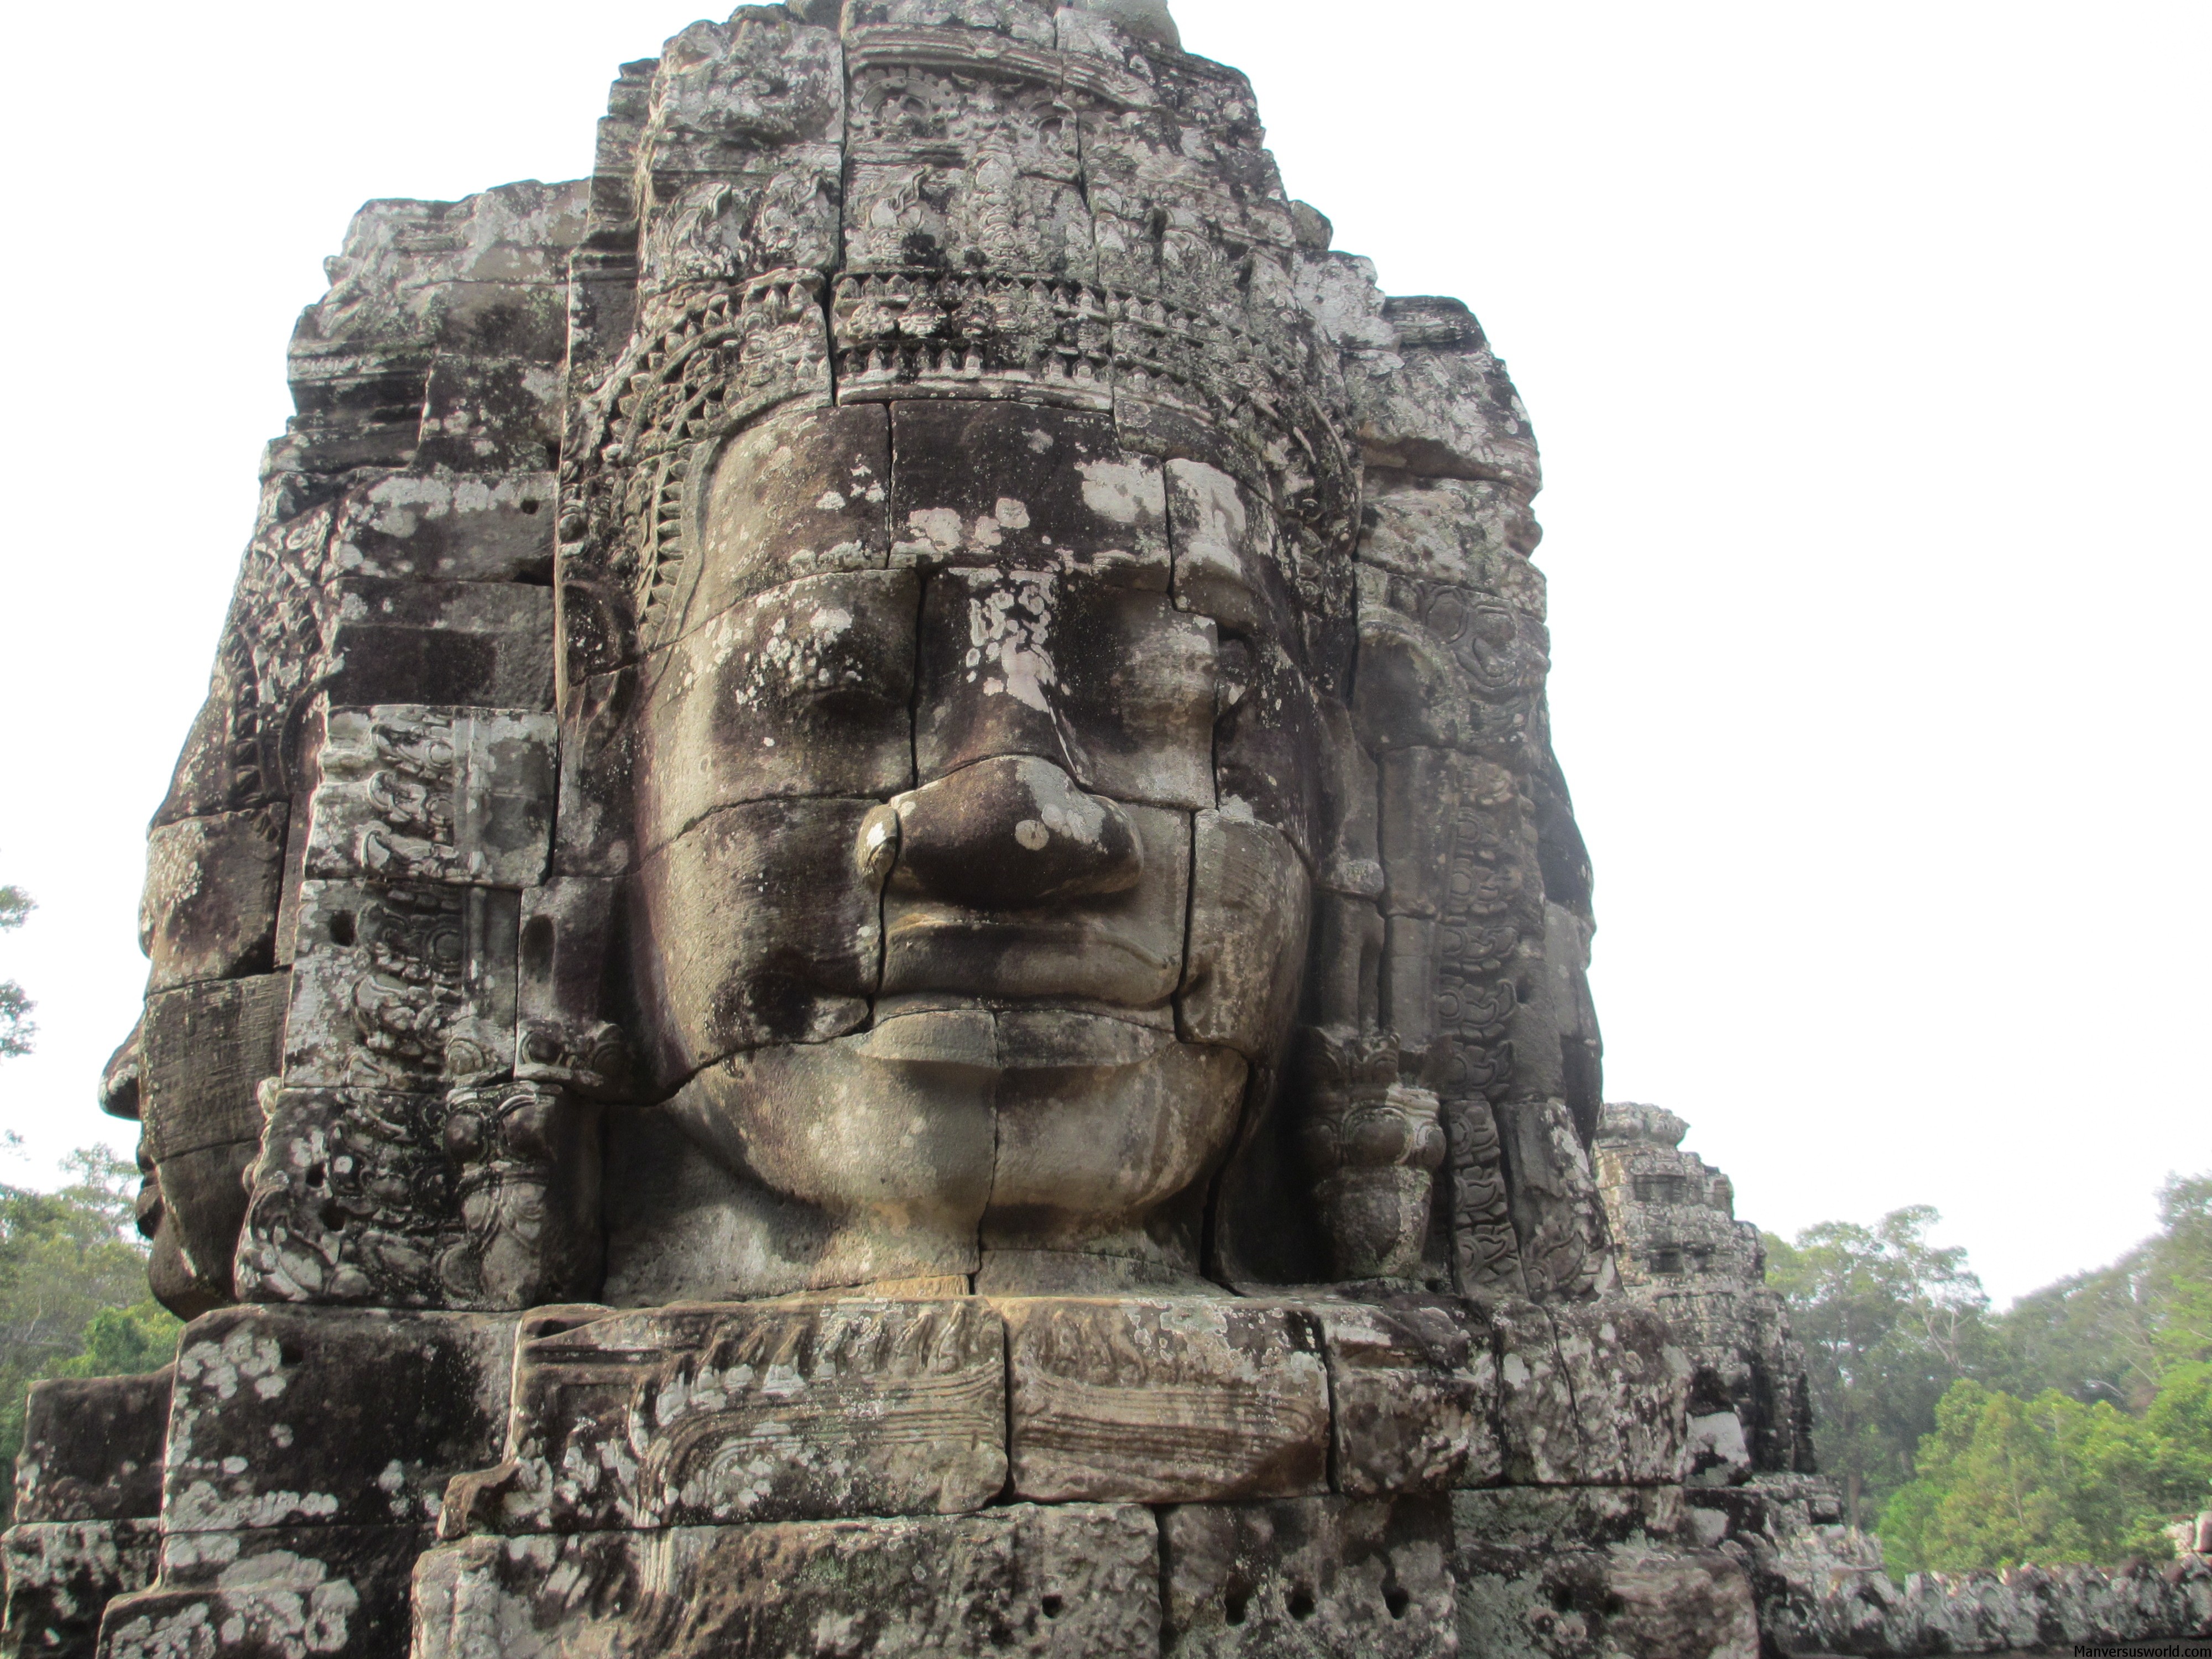 The myserious smiles of the Bayon temple in Cambodia